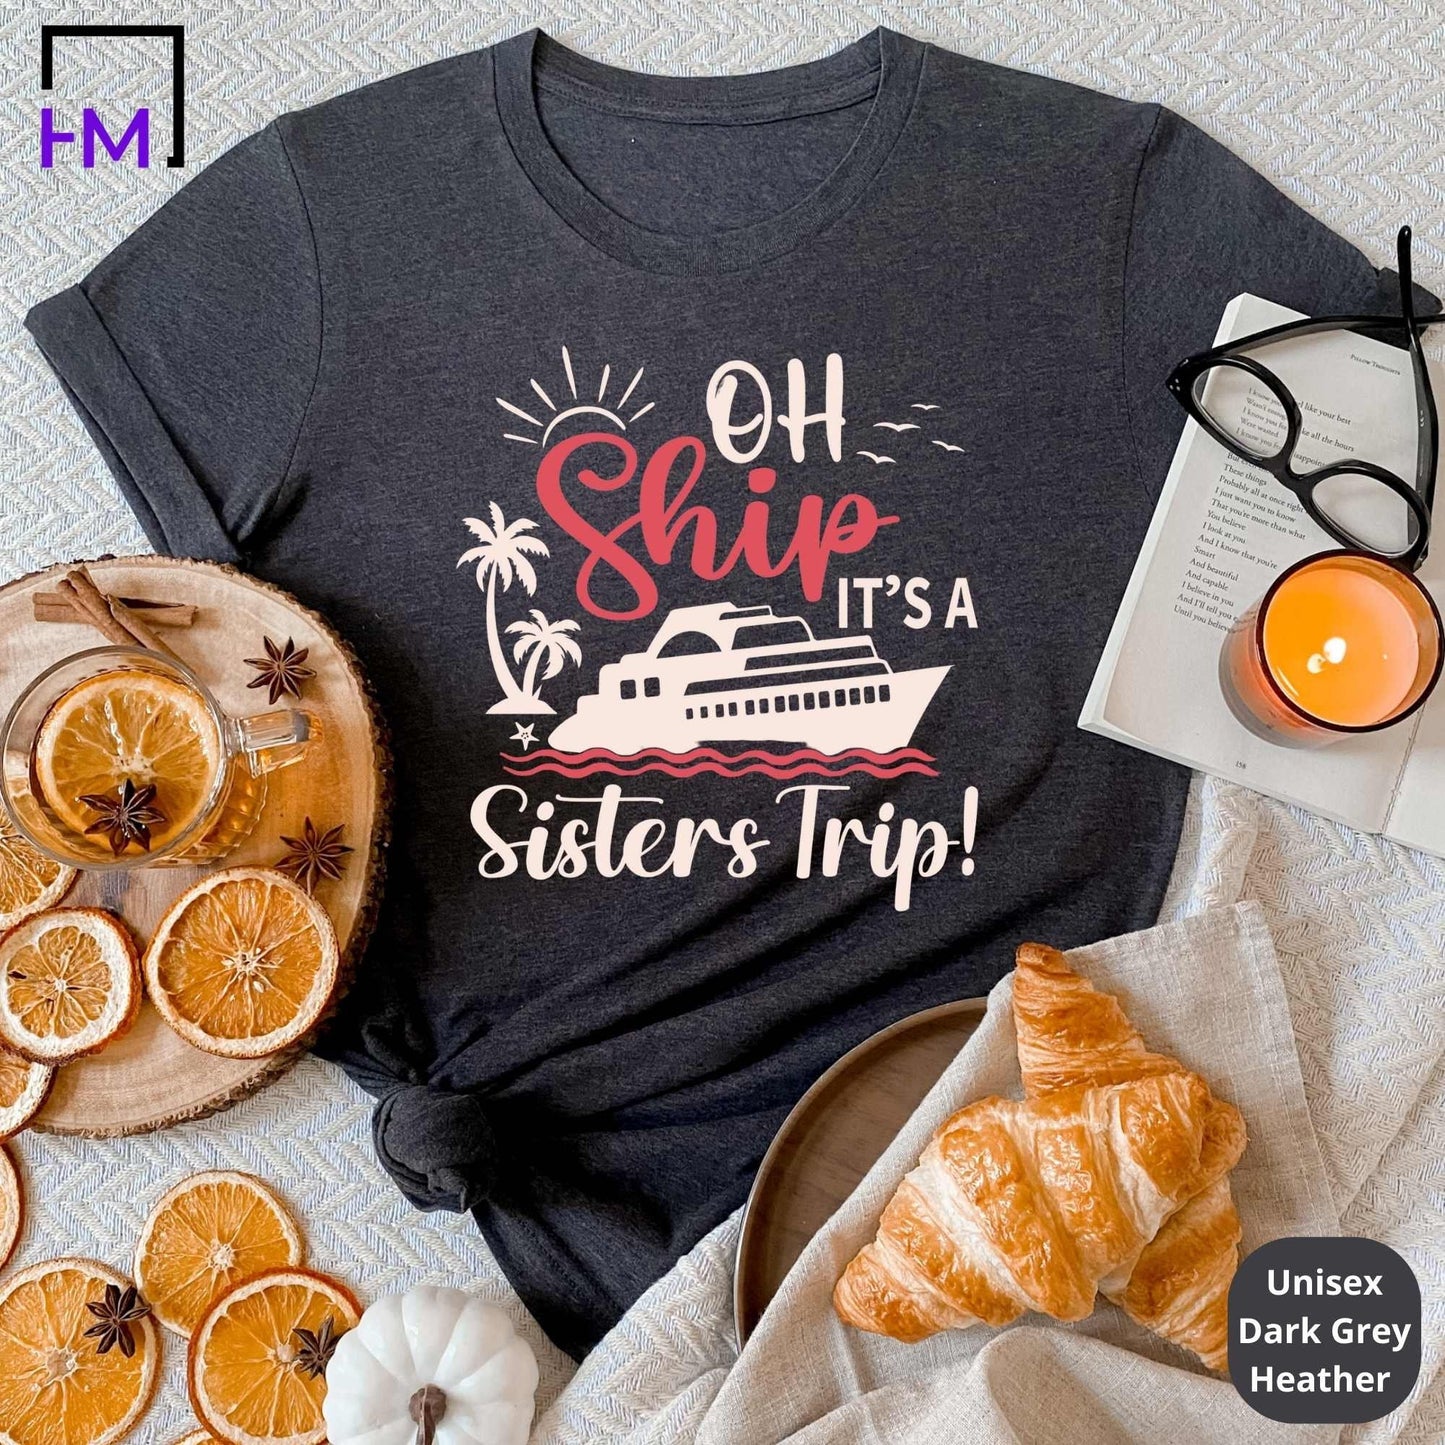 Sisters Cruise Shirts for Girls Trip HMDesignStudioUS